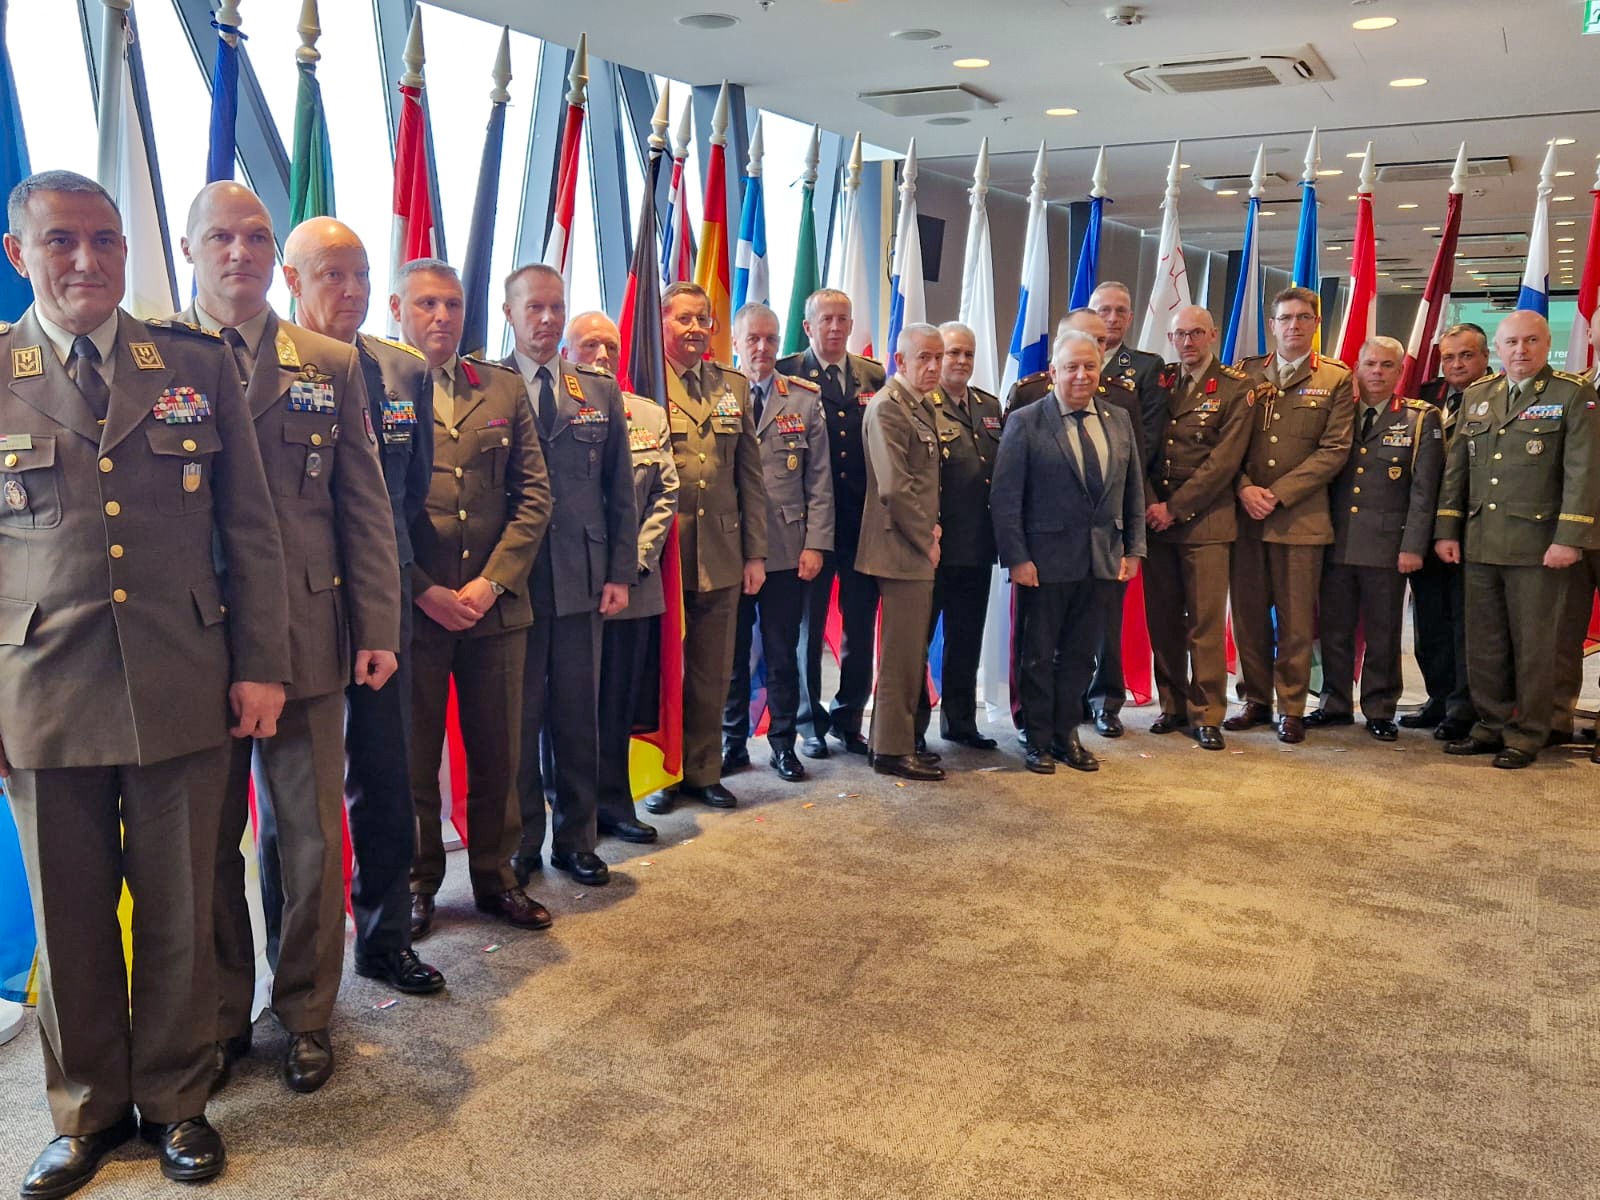 The Chief of Staff of the Army attends the annual meeting of the FINABEL Forum in Latvia